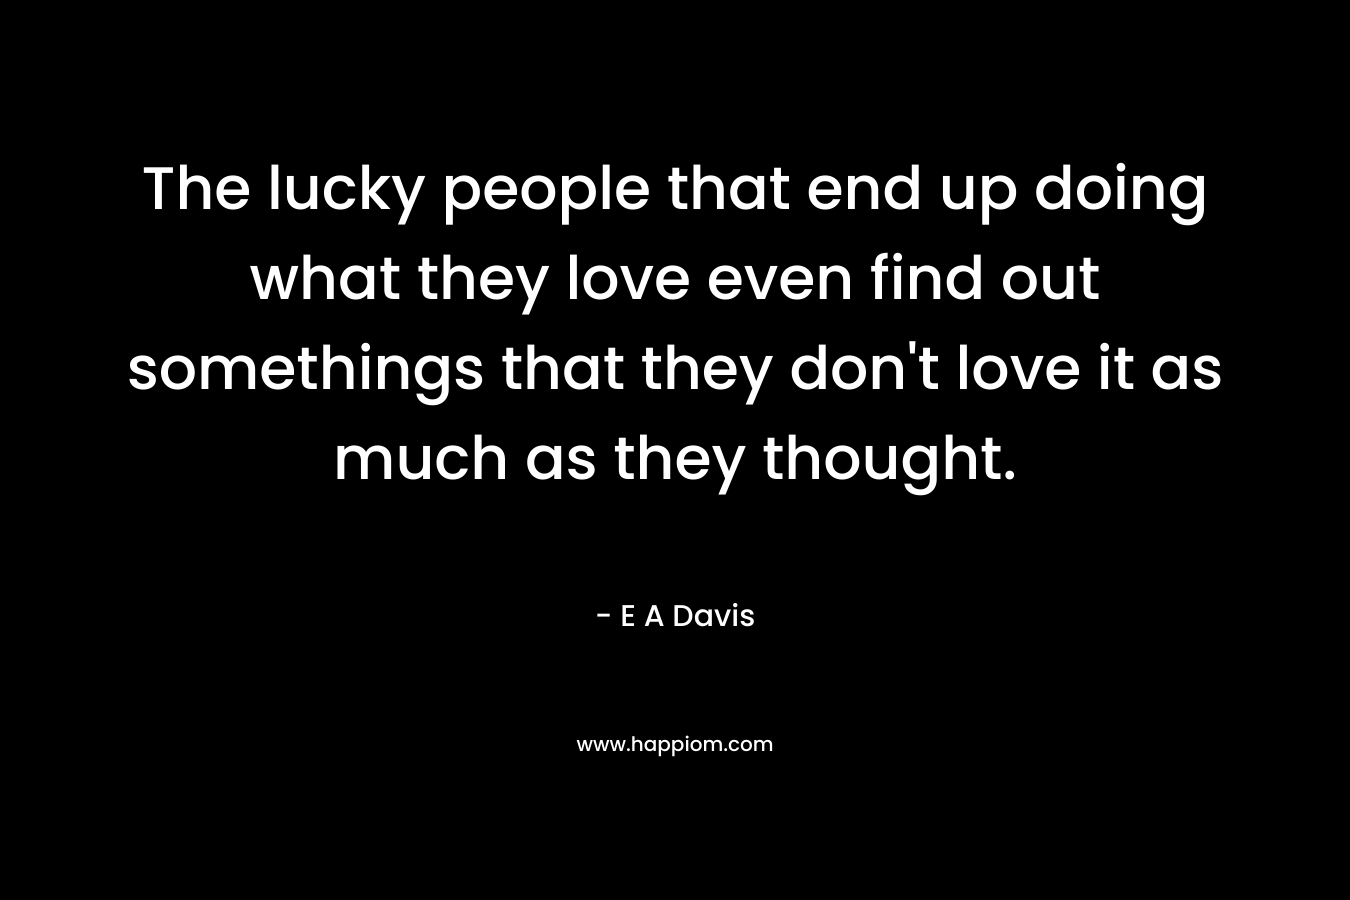 The lucky people that end up doing what they love even find out somethings that they don't love it as much as they thought.